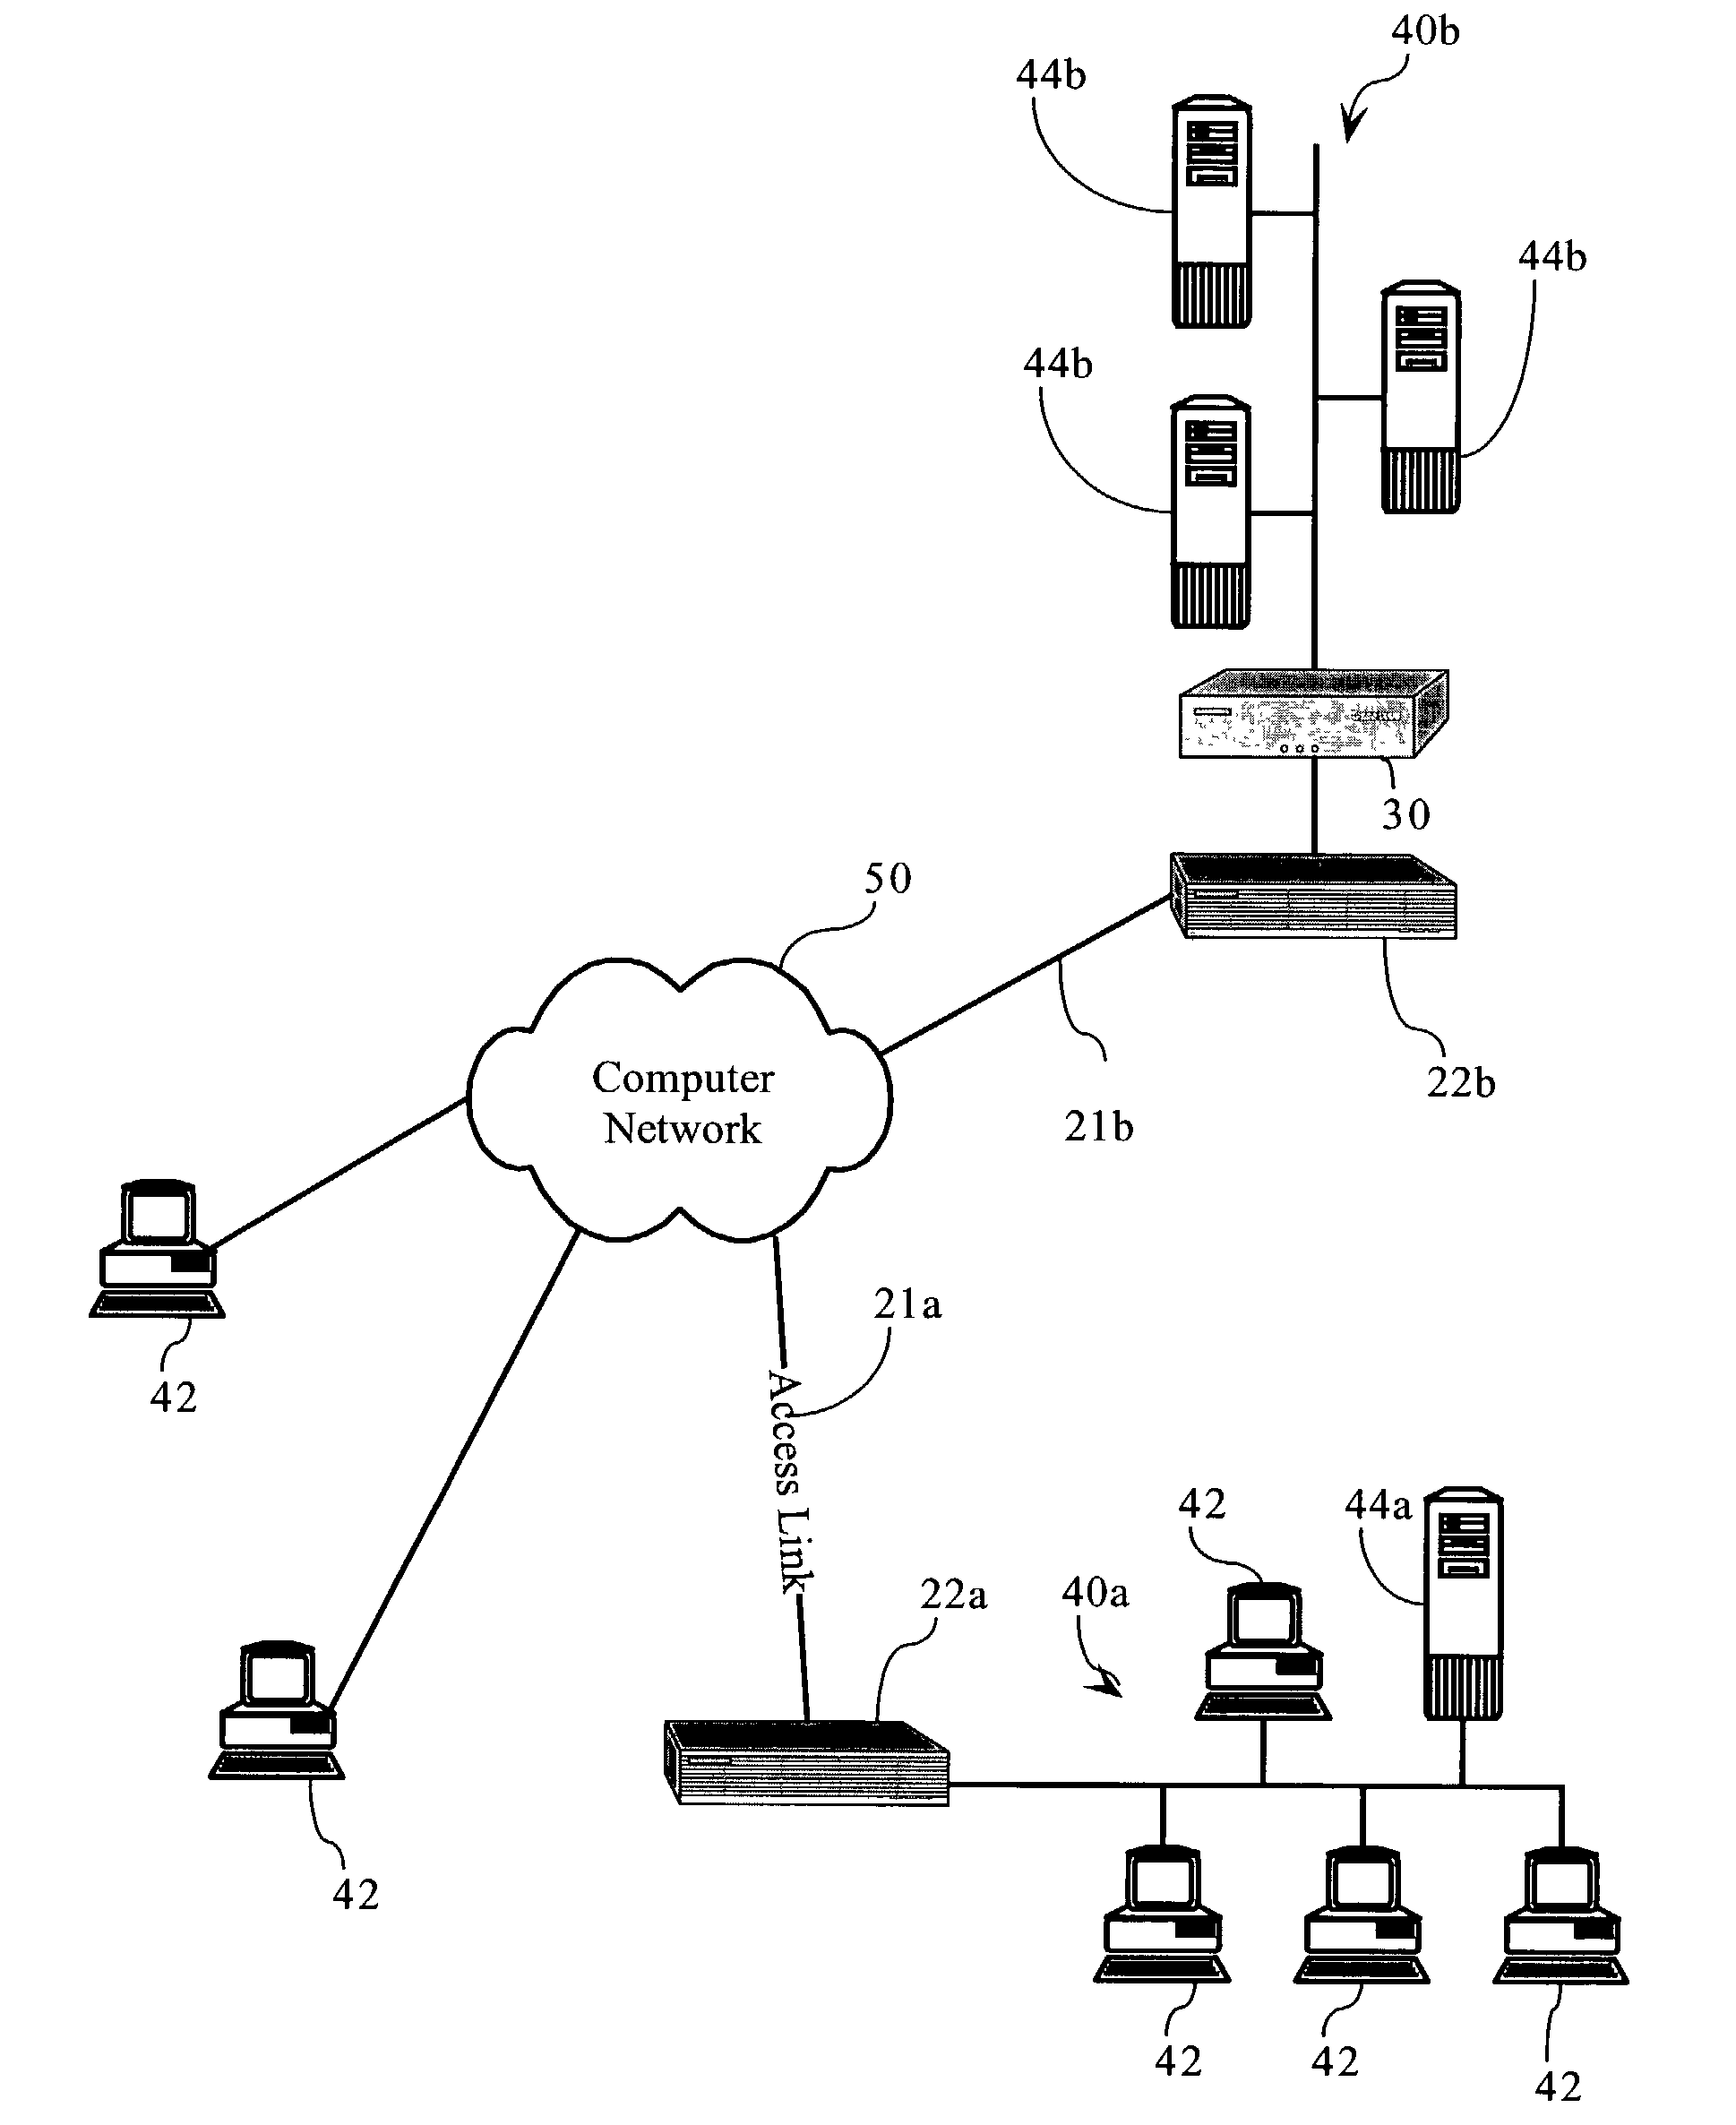 Methods, apparatuses and systems for transparently intermediating network traffic over connection-based authentication protocols